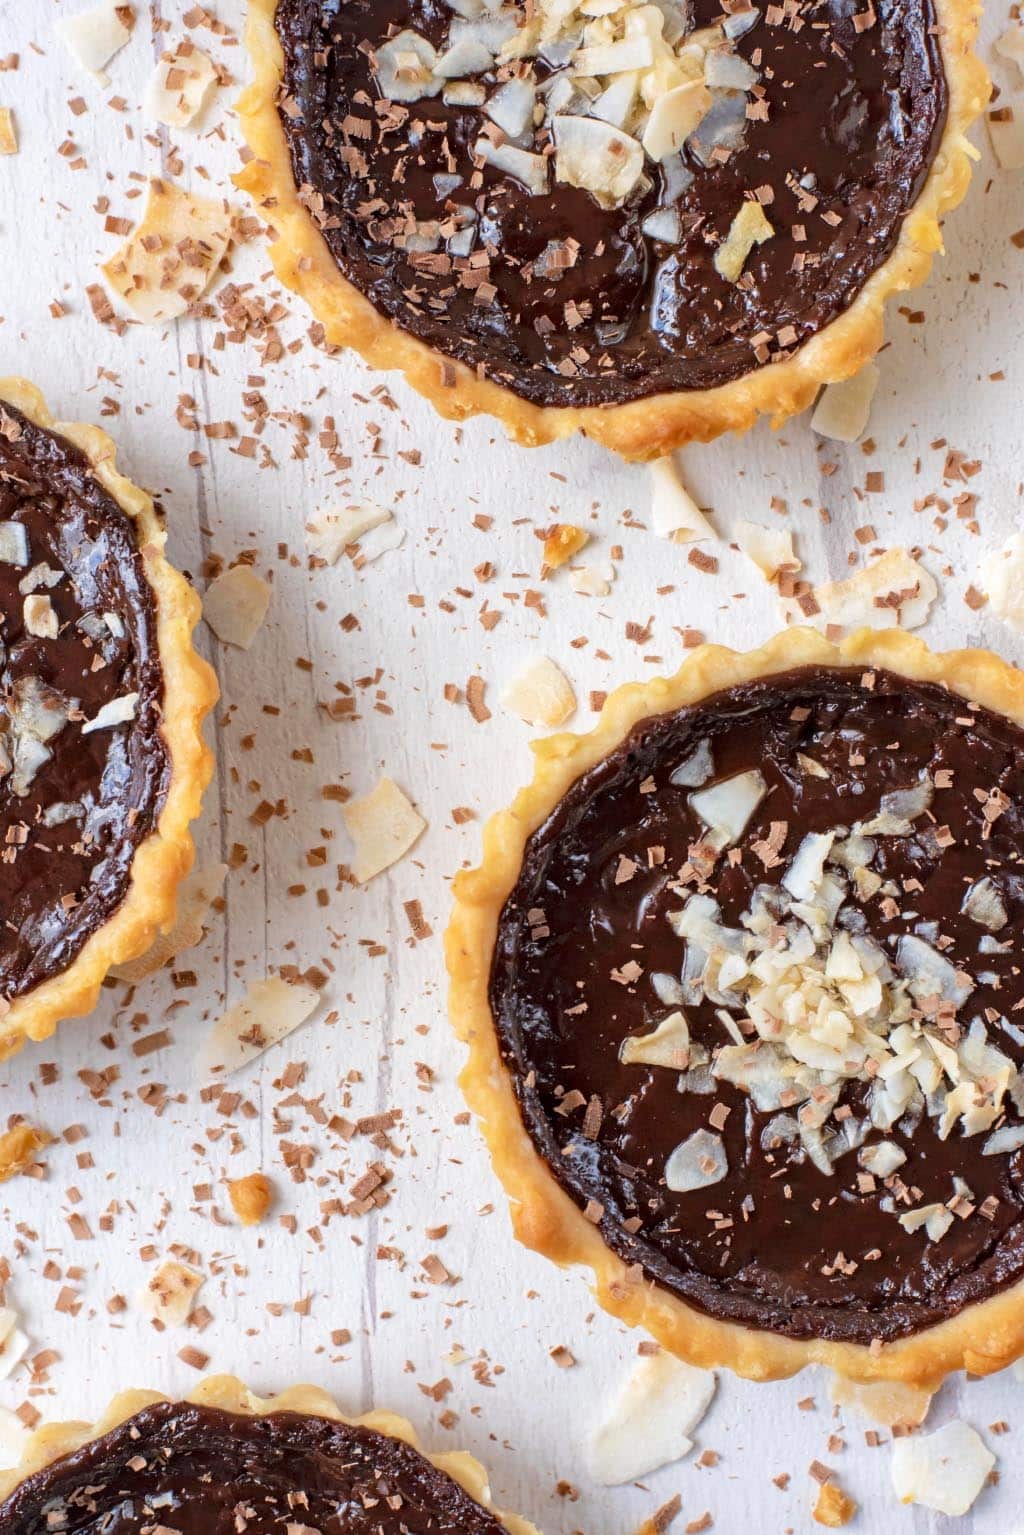 Chocolate Pies, surrounded by chocolate shavings.